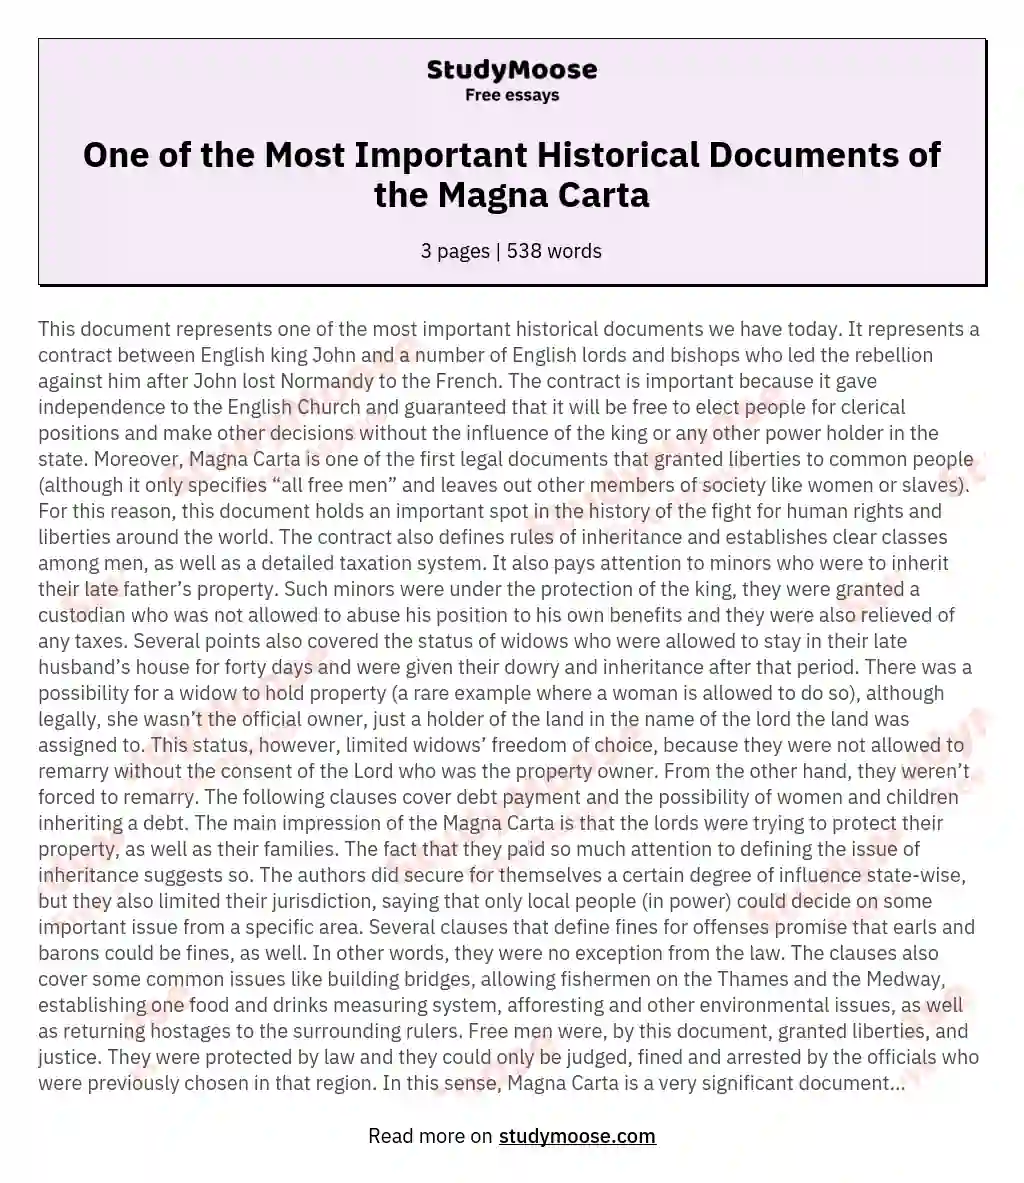 One of the Most Important Historical Documents of the Magna Carta essay